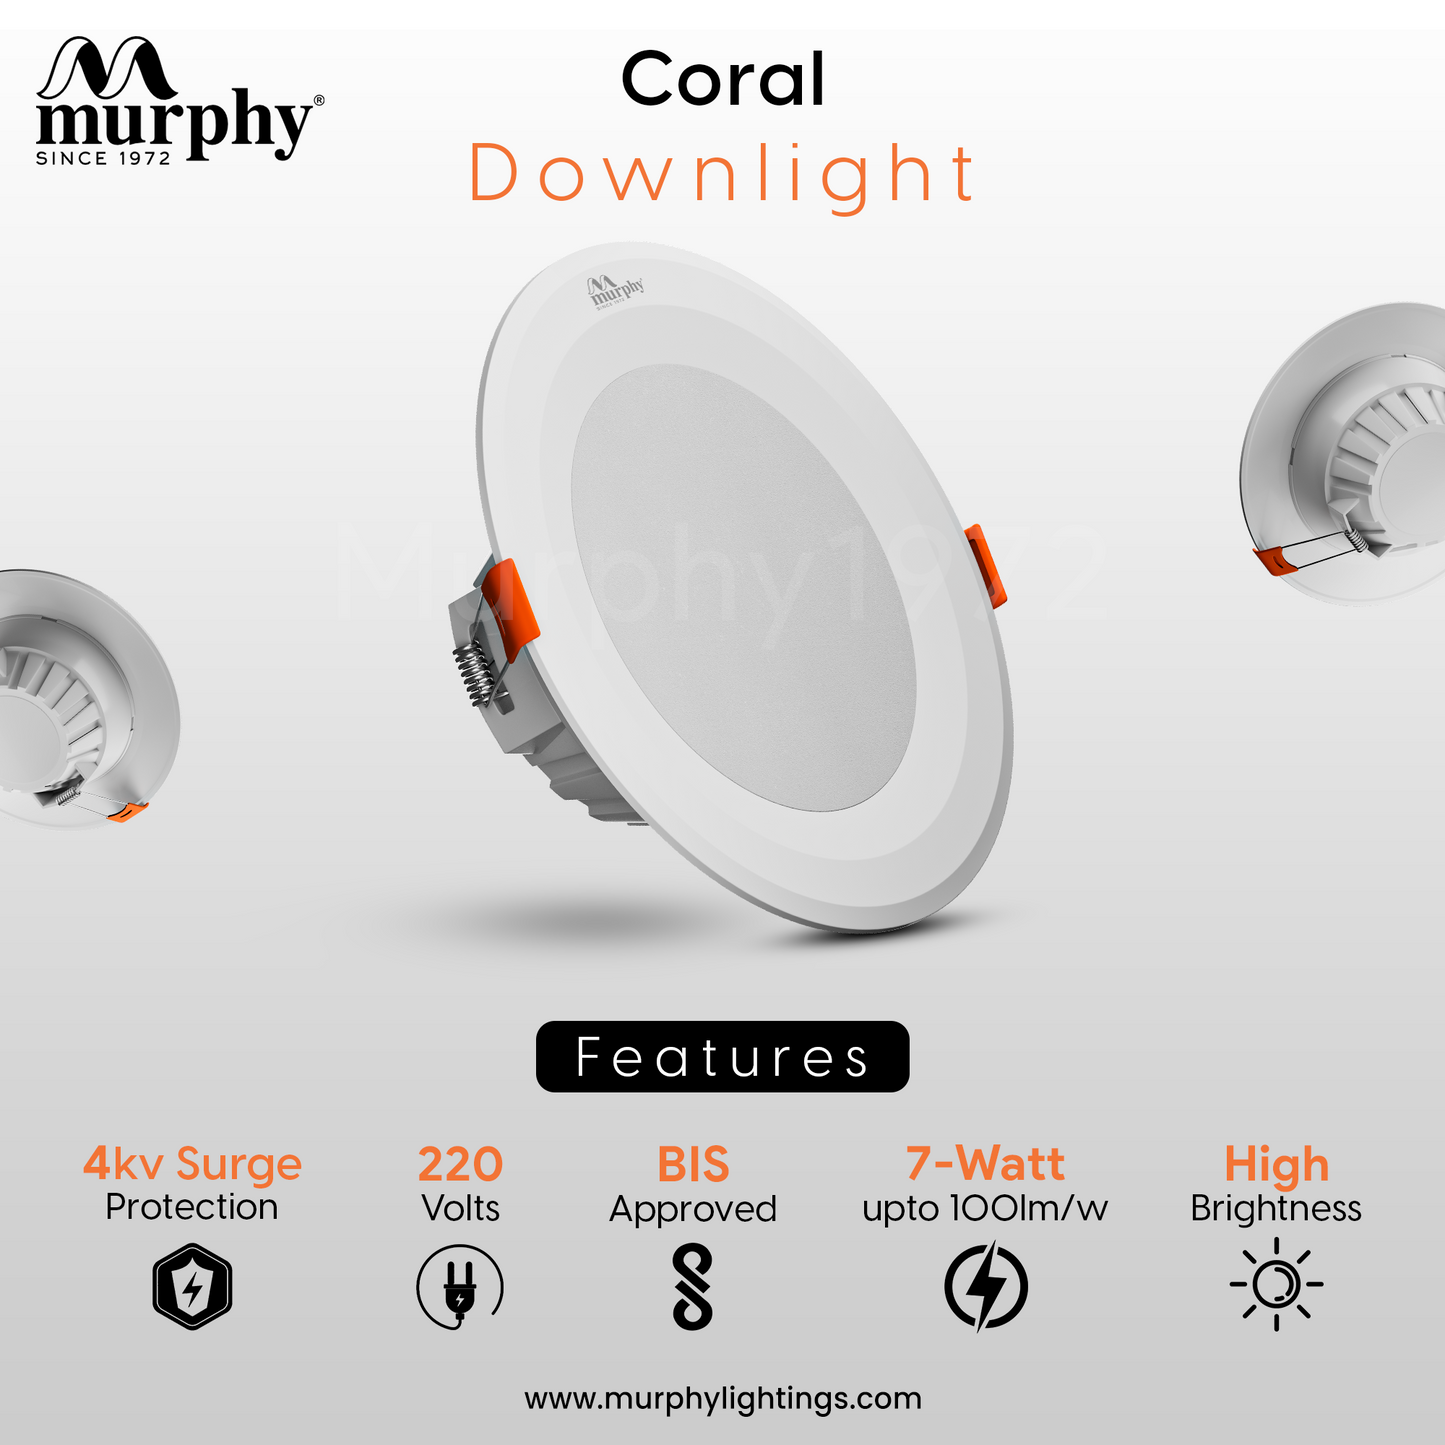 Murphy 7W CORAL LED Concealed Box Down Light